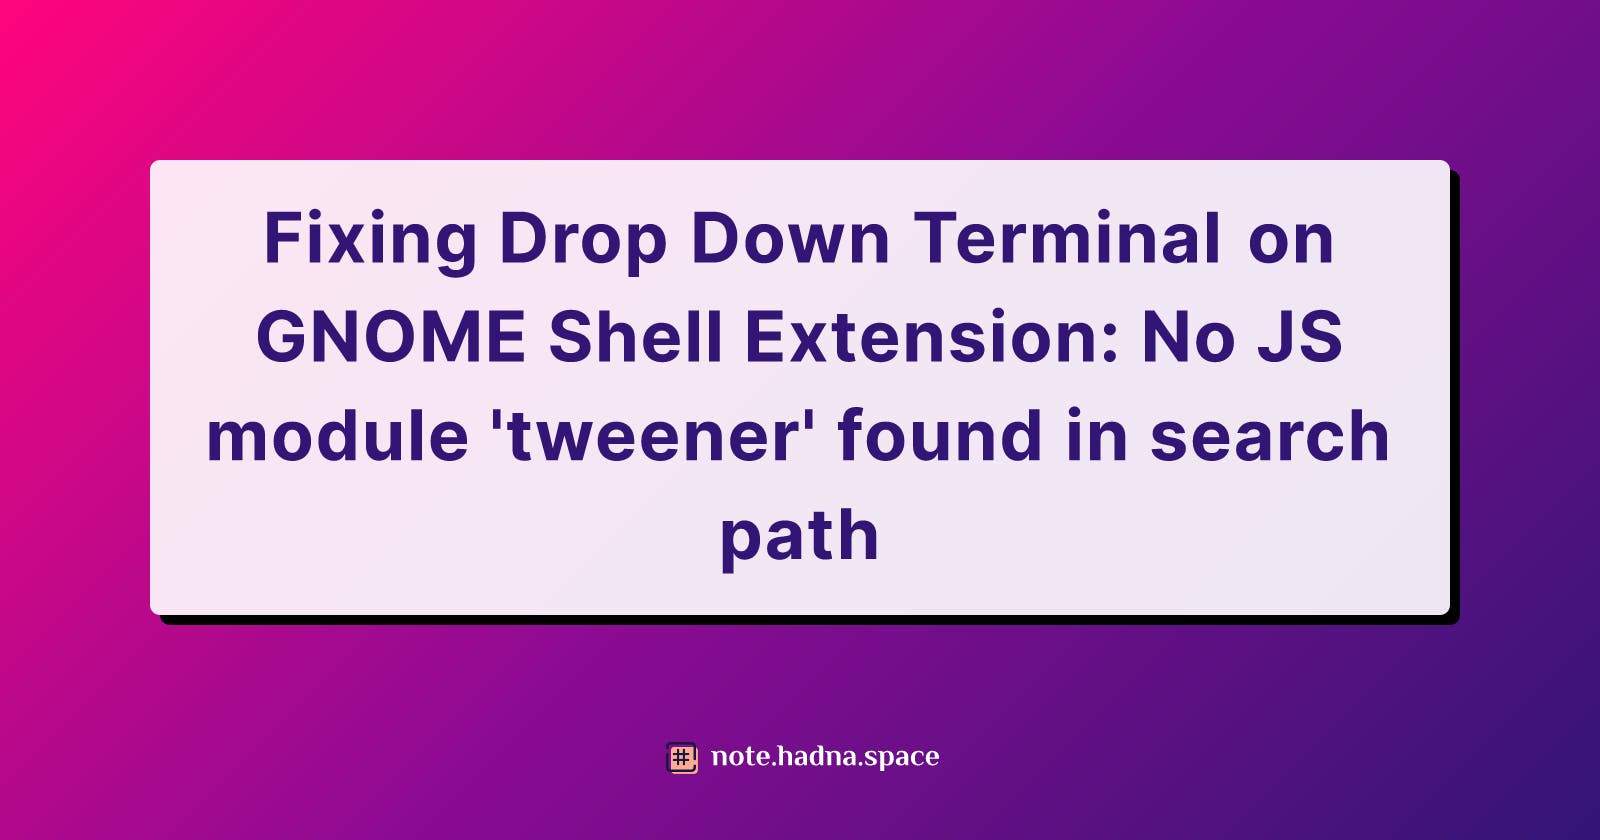 Fixing Drop Down Terminal on GNOME Shell Extension: No JS module 'tweener' found in search path